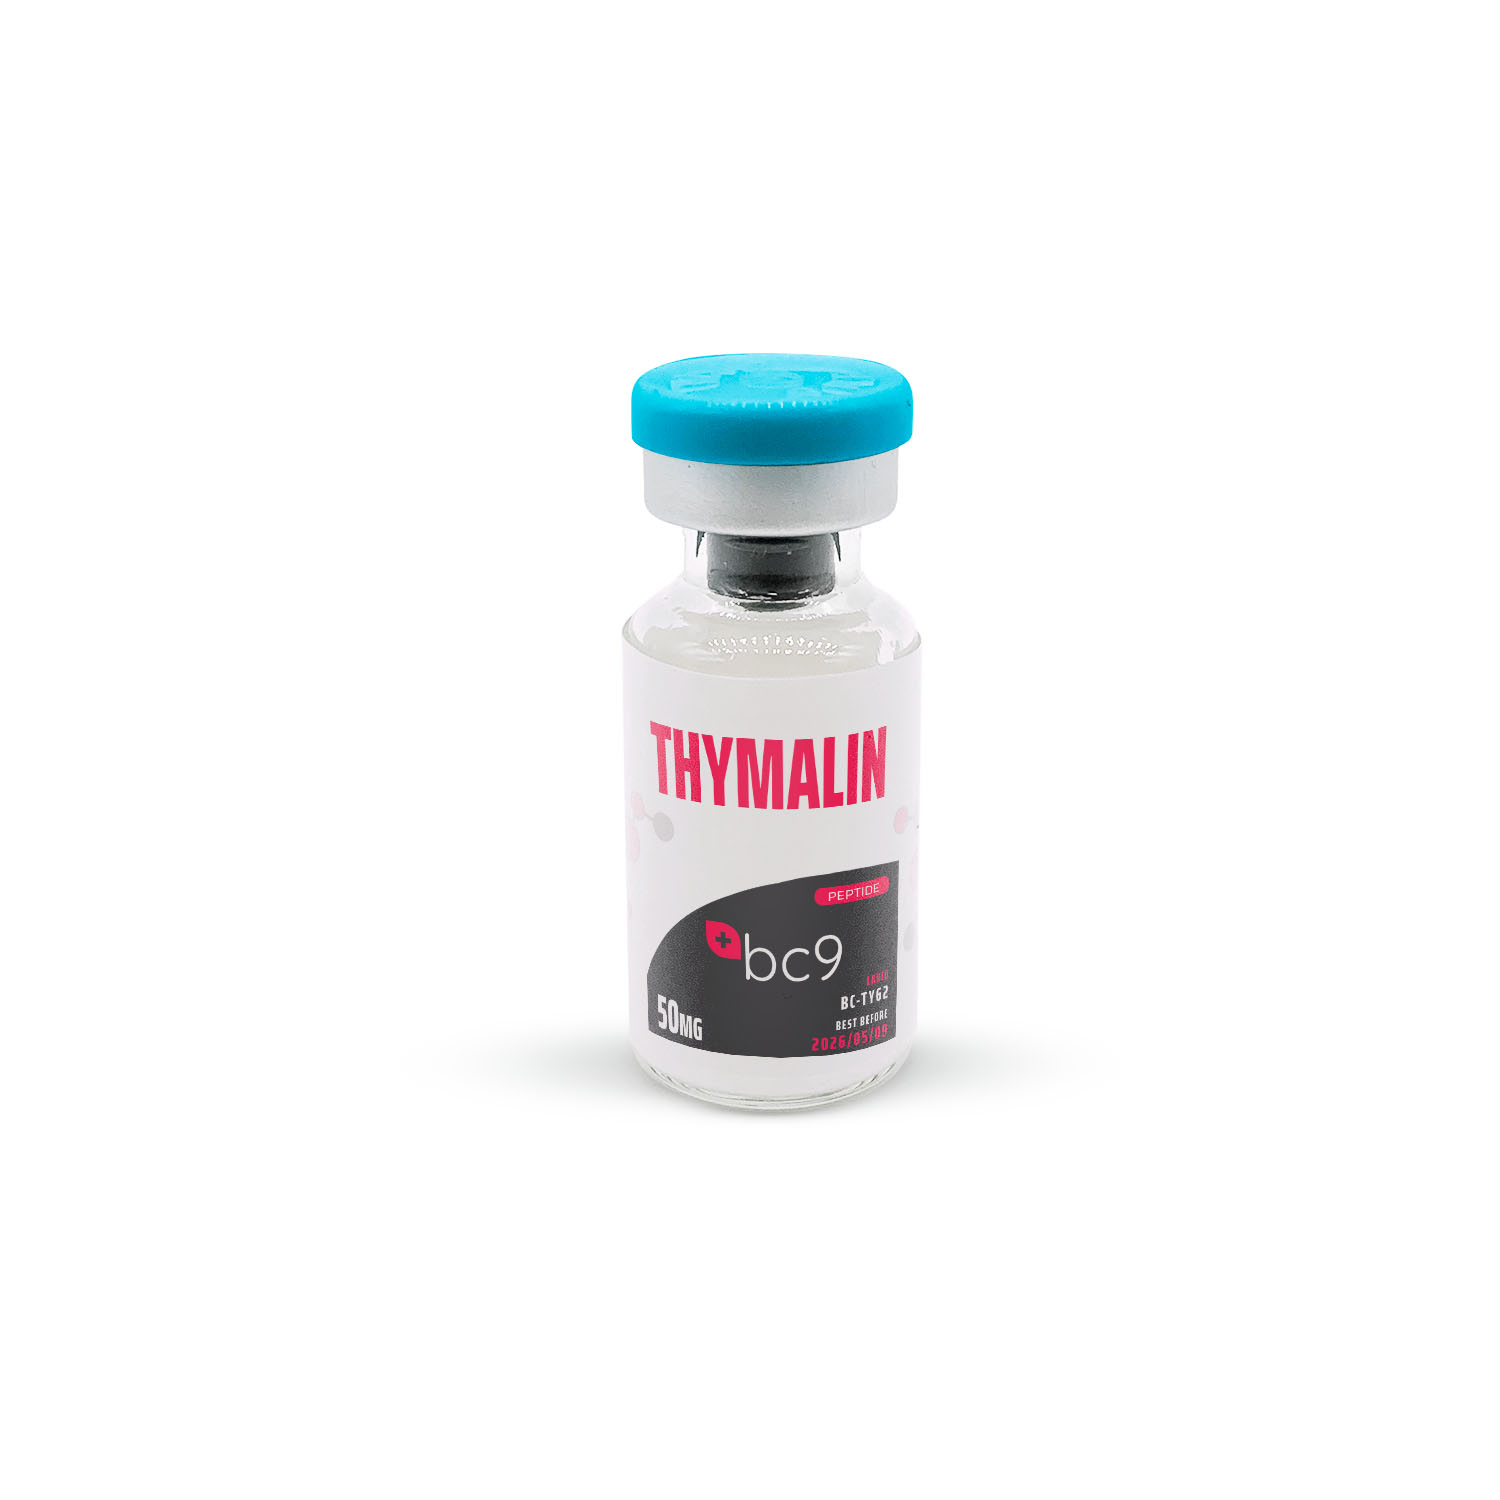 Thymalin Peptide For Sale | Fast Shipping | BC9.org